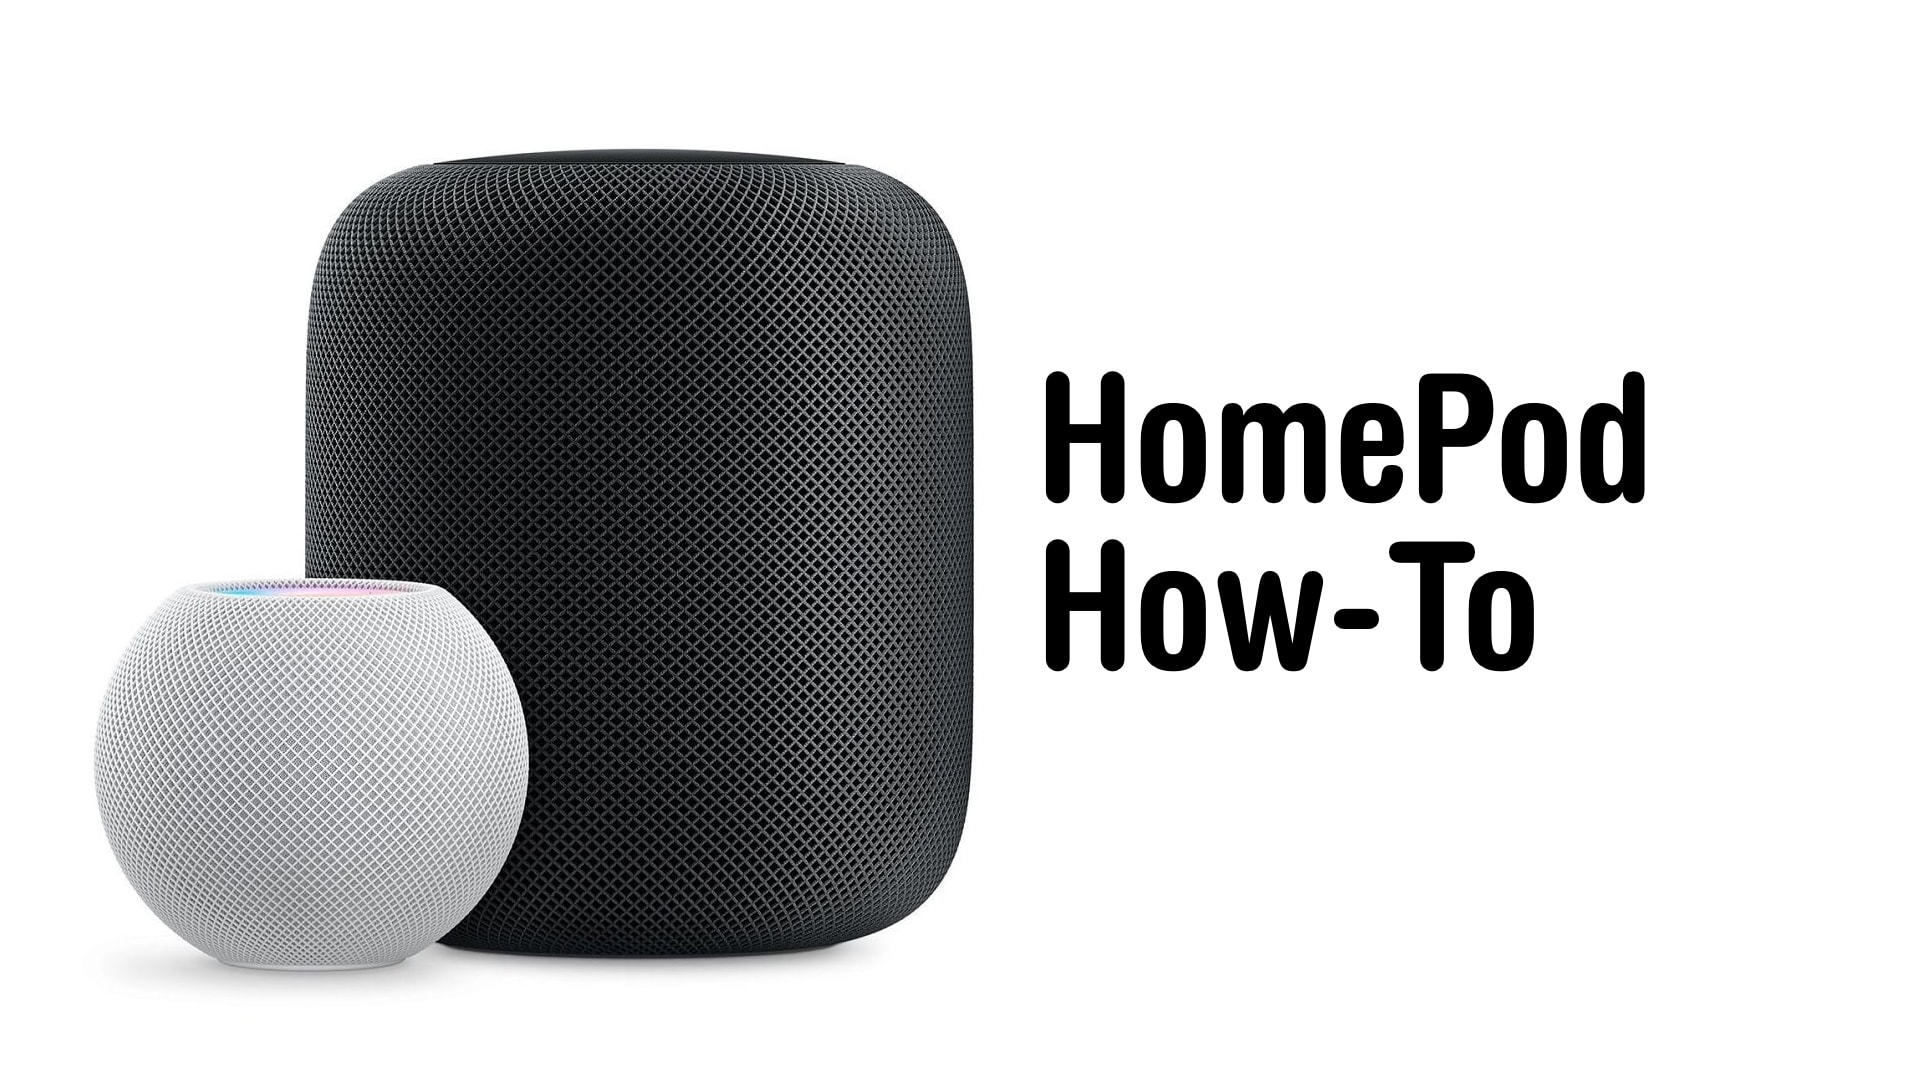 How to get the latest HomePod 17.3 software update